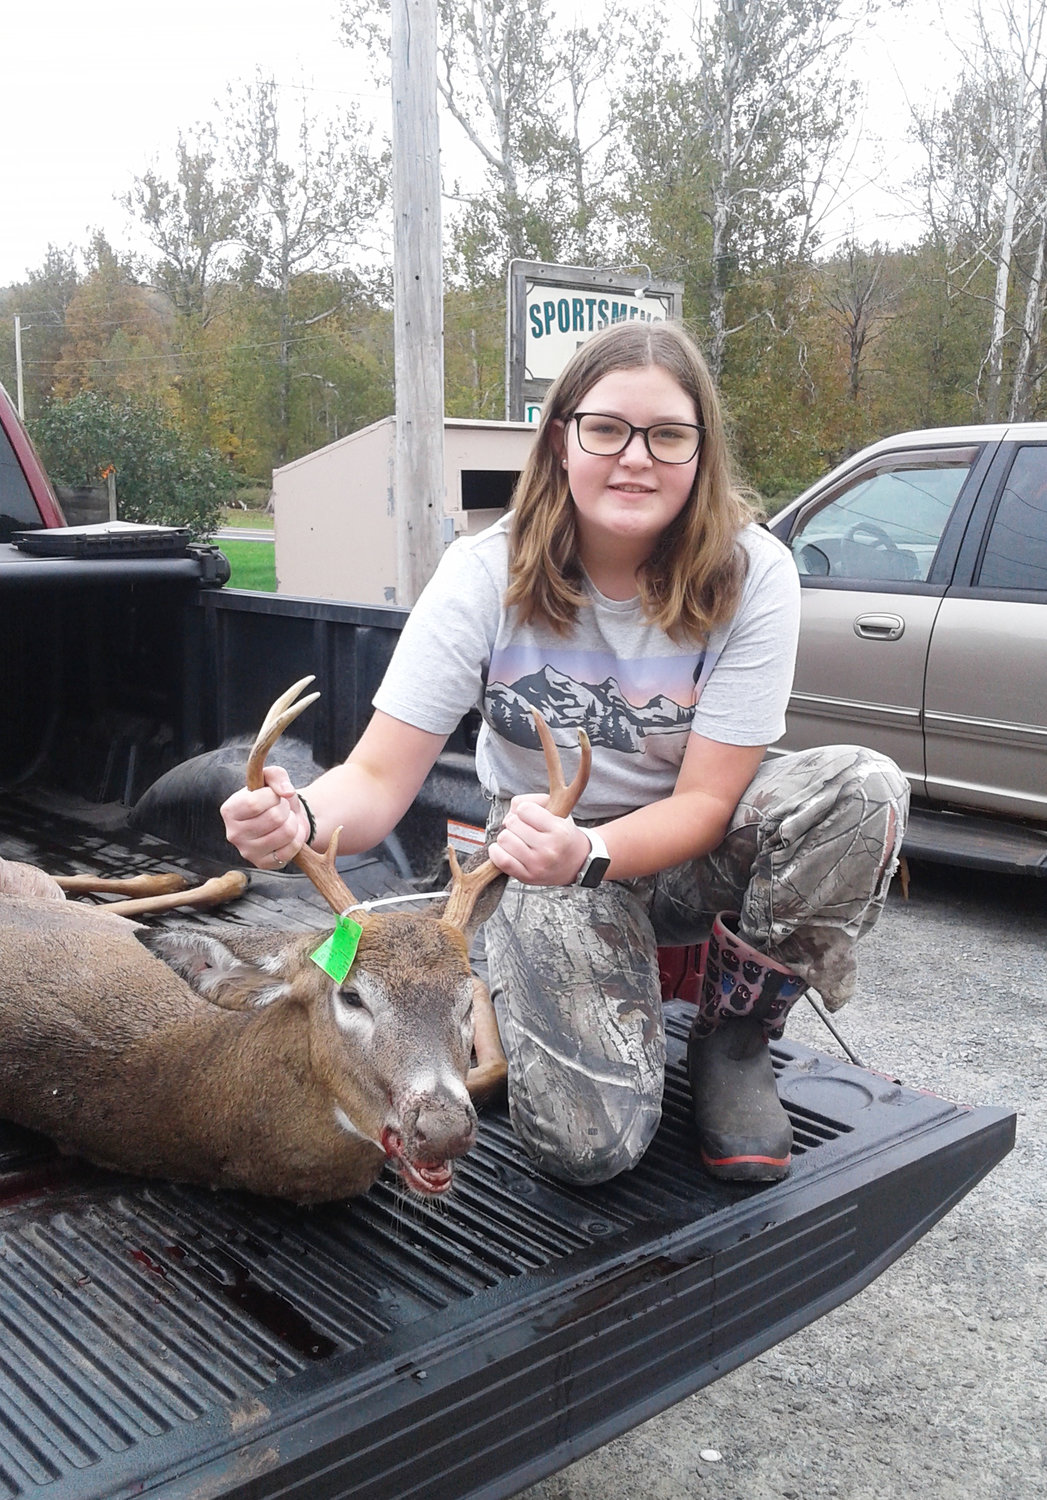 Maylee Phelps of Callicoon harvested a 177.05 point deer. The 6-pointer weighed 131.8 pounds.